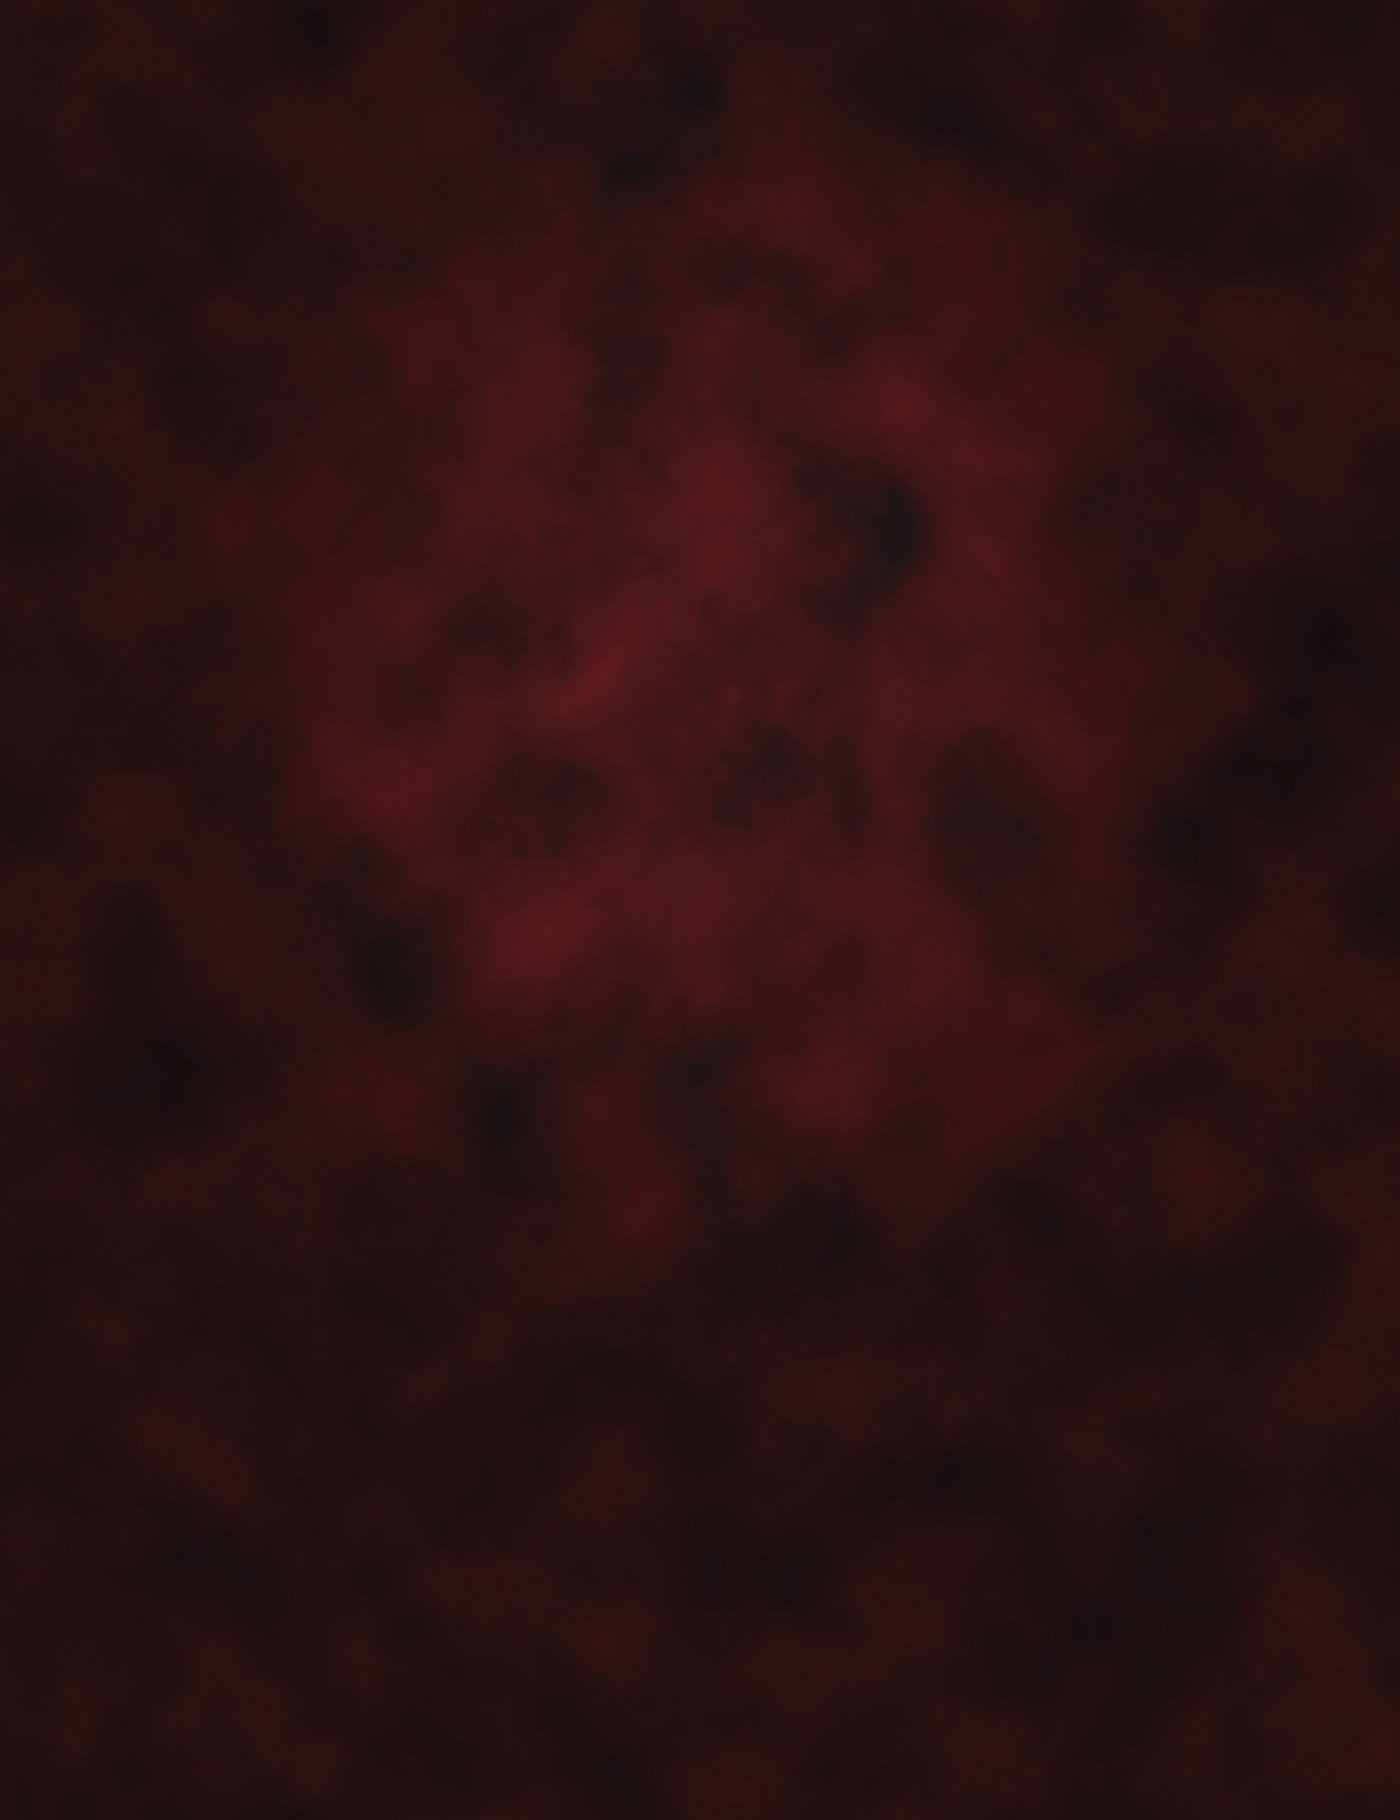 Abstract Dark Red Texture With Little Black Photography Backdrop J-0644 Shopbackdrop